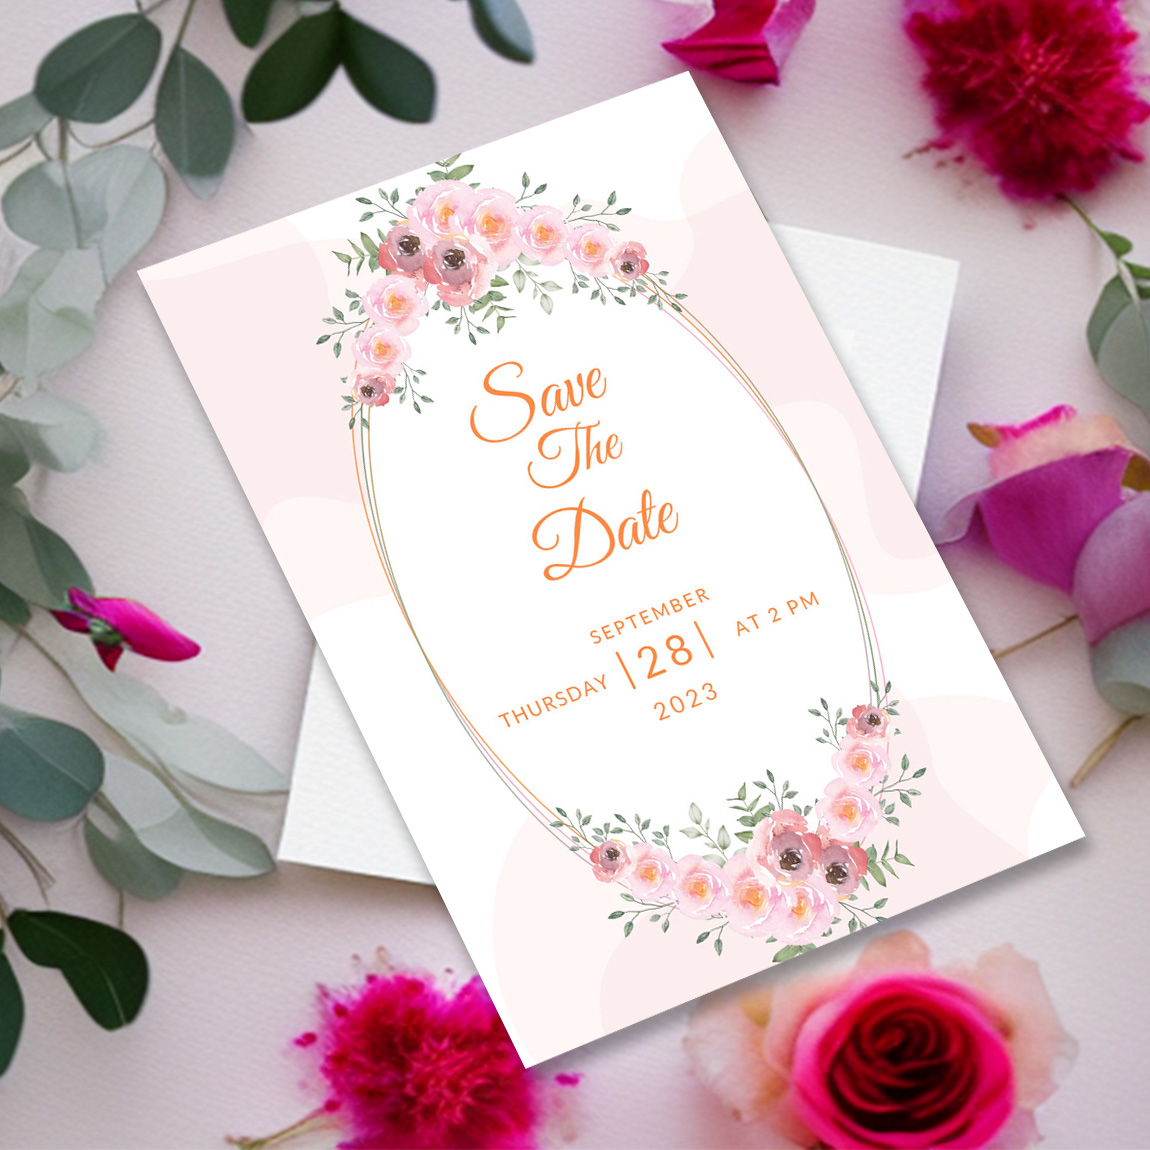 Image of colorful wedding greeting card with flowers.